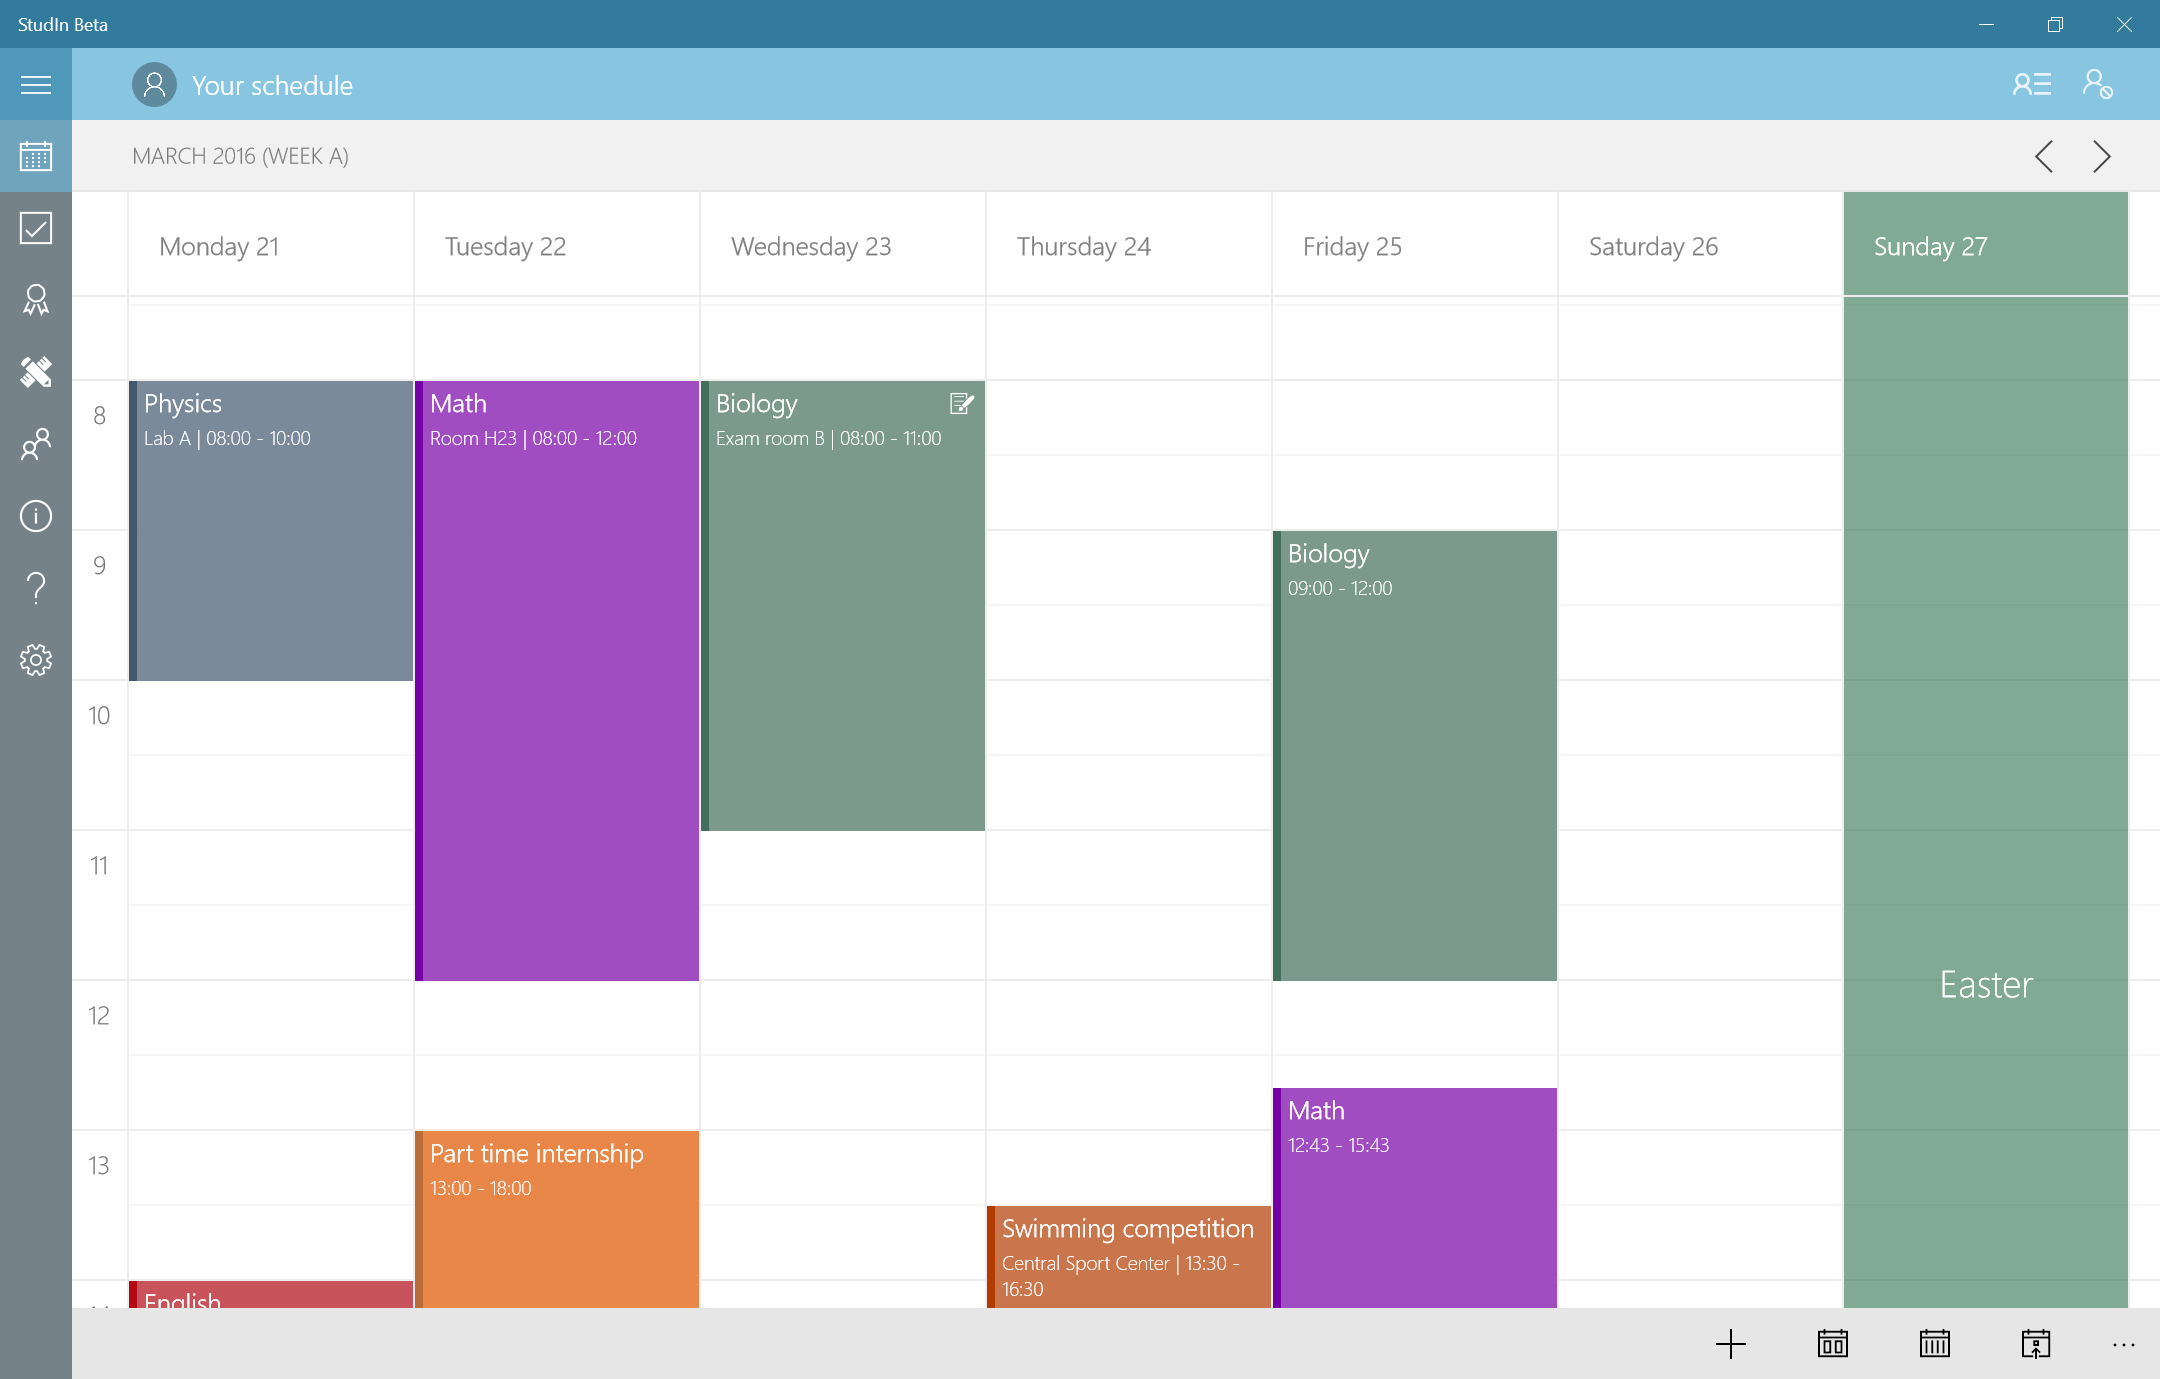 The schedule regrouping all your lessons, exams, internships, holidays and events.